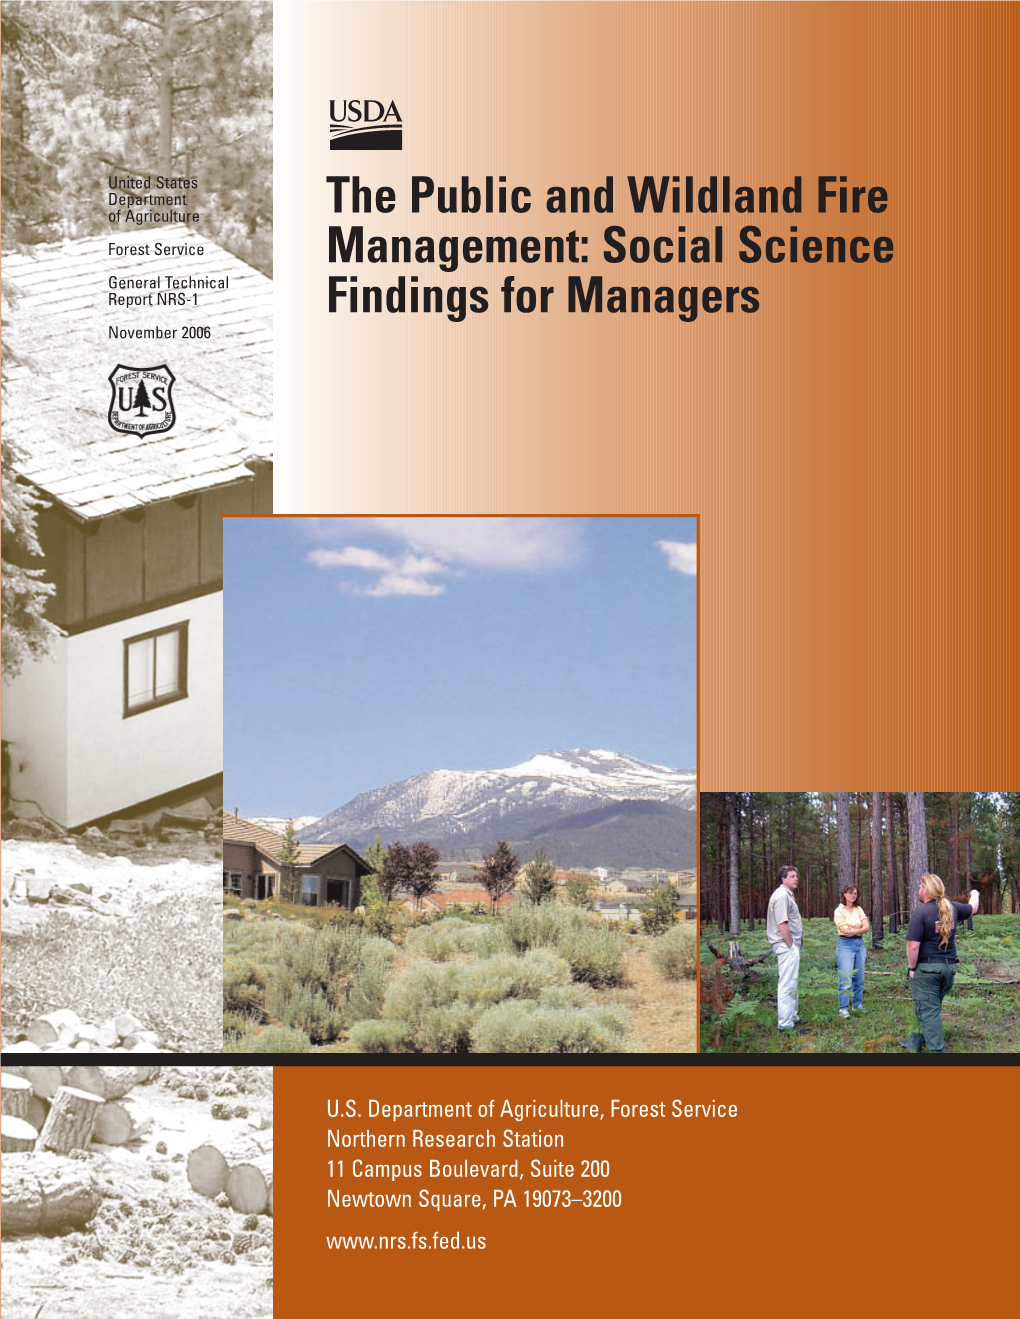 The Public and Wildland Fire Management: Social Science Findings for Managers